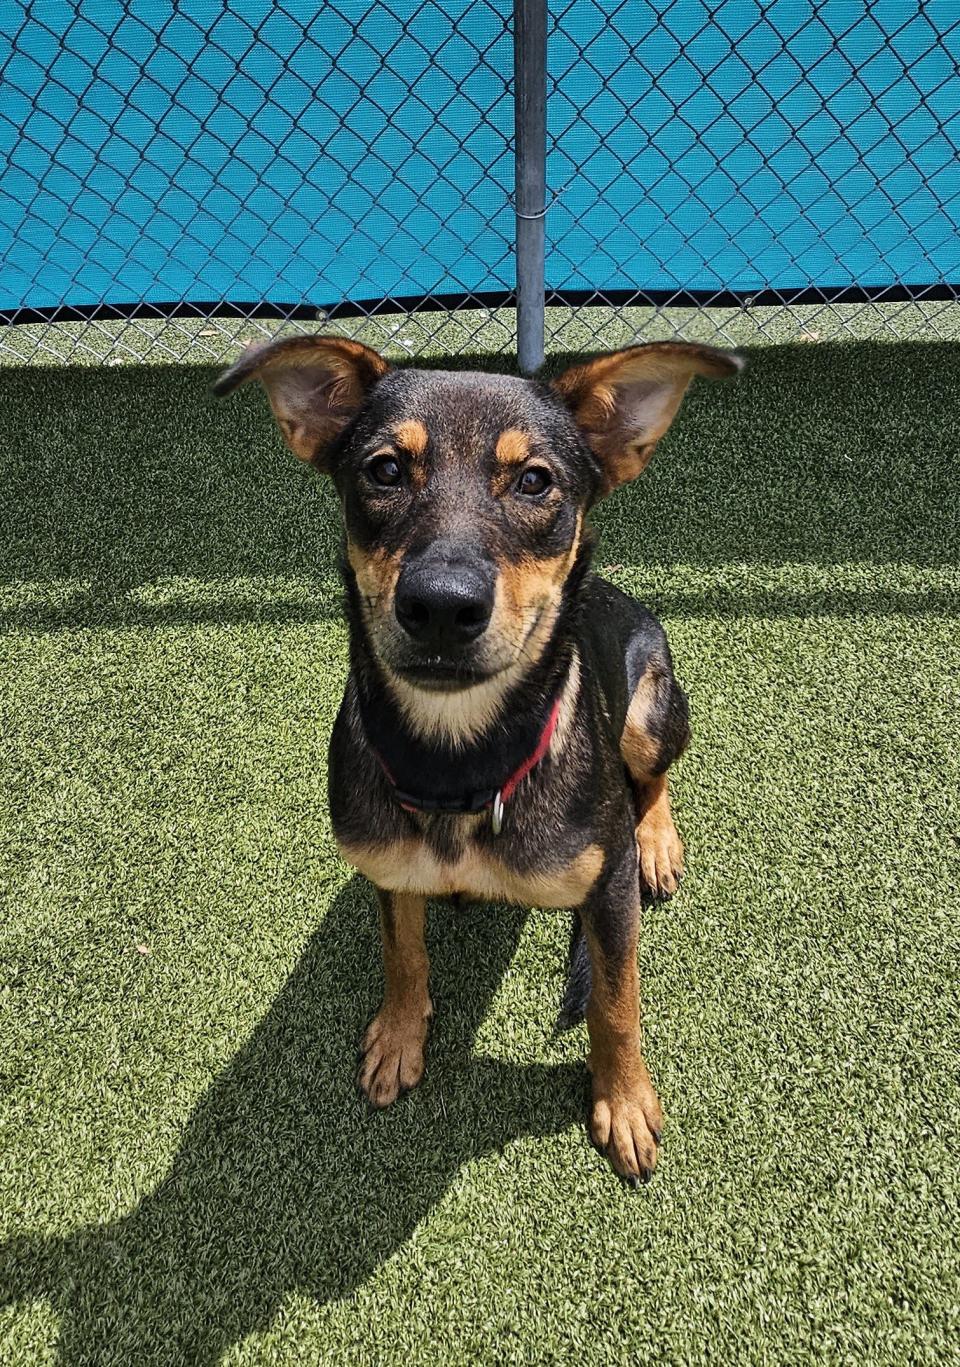 Olivia loves to chase. In fact, her adoption papers say no home with small kids or other pets because she will be chasing them all day. She loves to chase a ball, play tug of war or hang out in the pool. She’s still a puppy, so manners school should be a must.